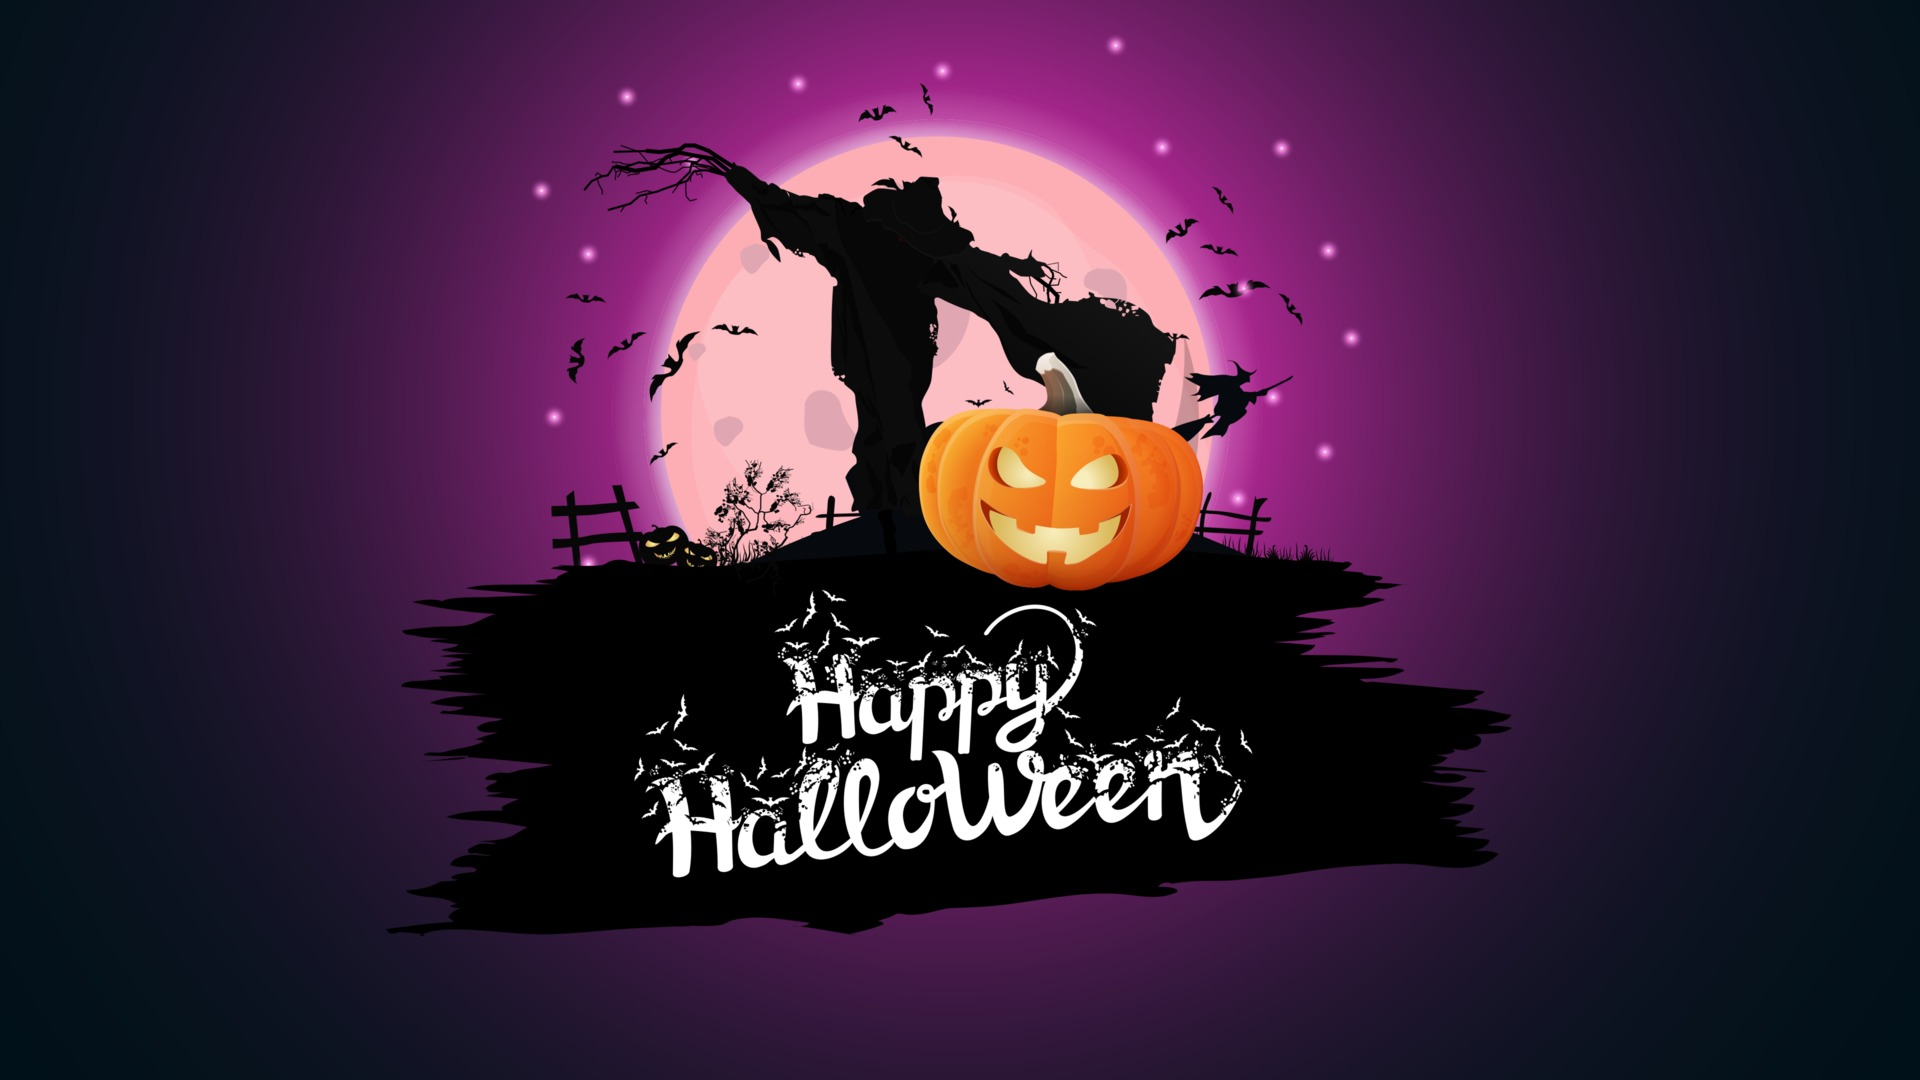 1920x1080 Happy Halloween, creative greeting postcard with Scarecrow and pumpkin Jack against the big pink full moon 2767115 Vector Art